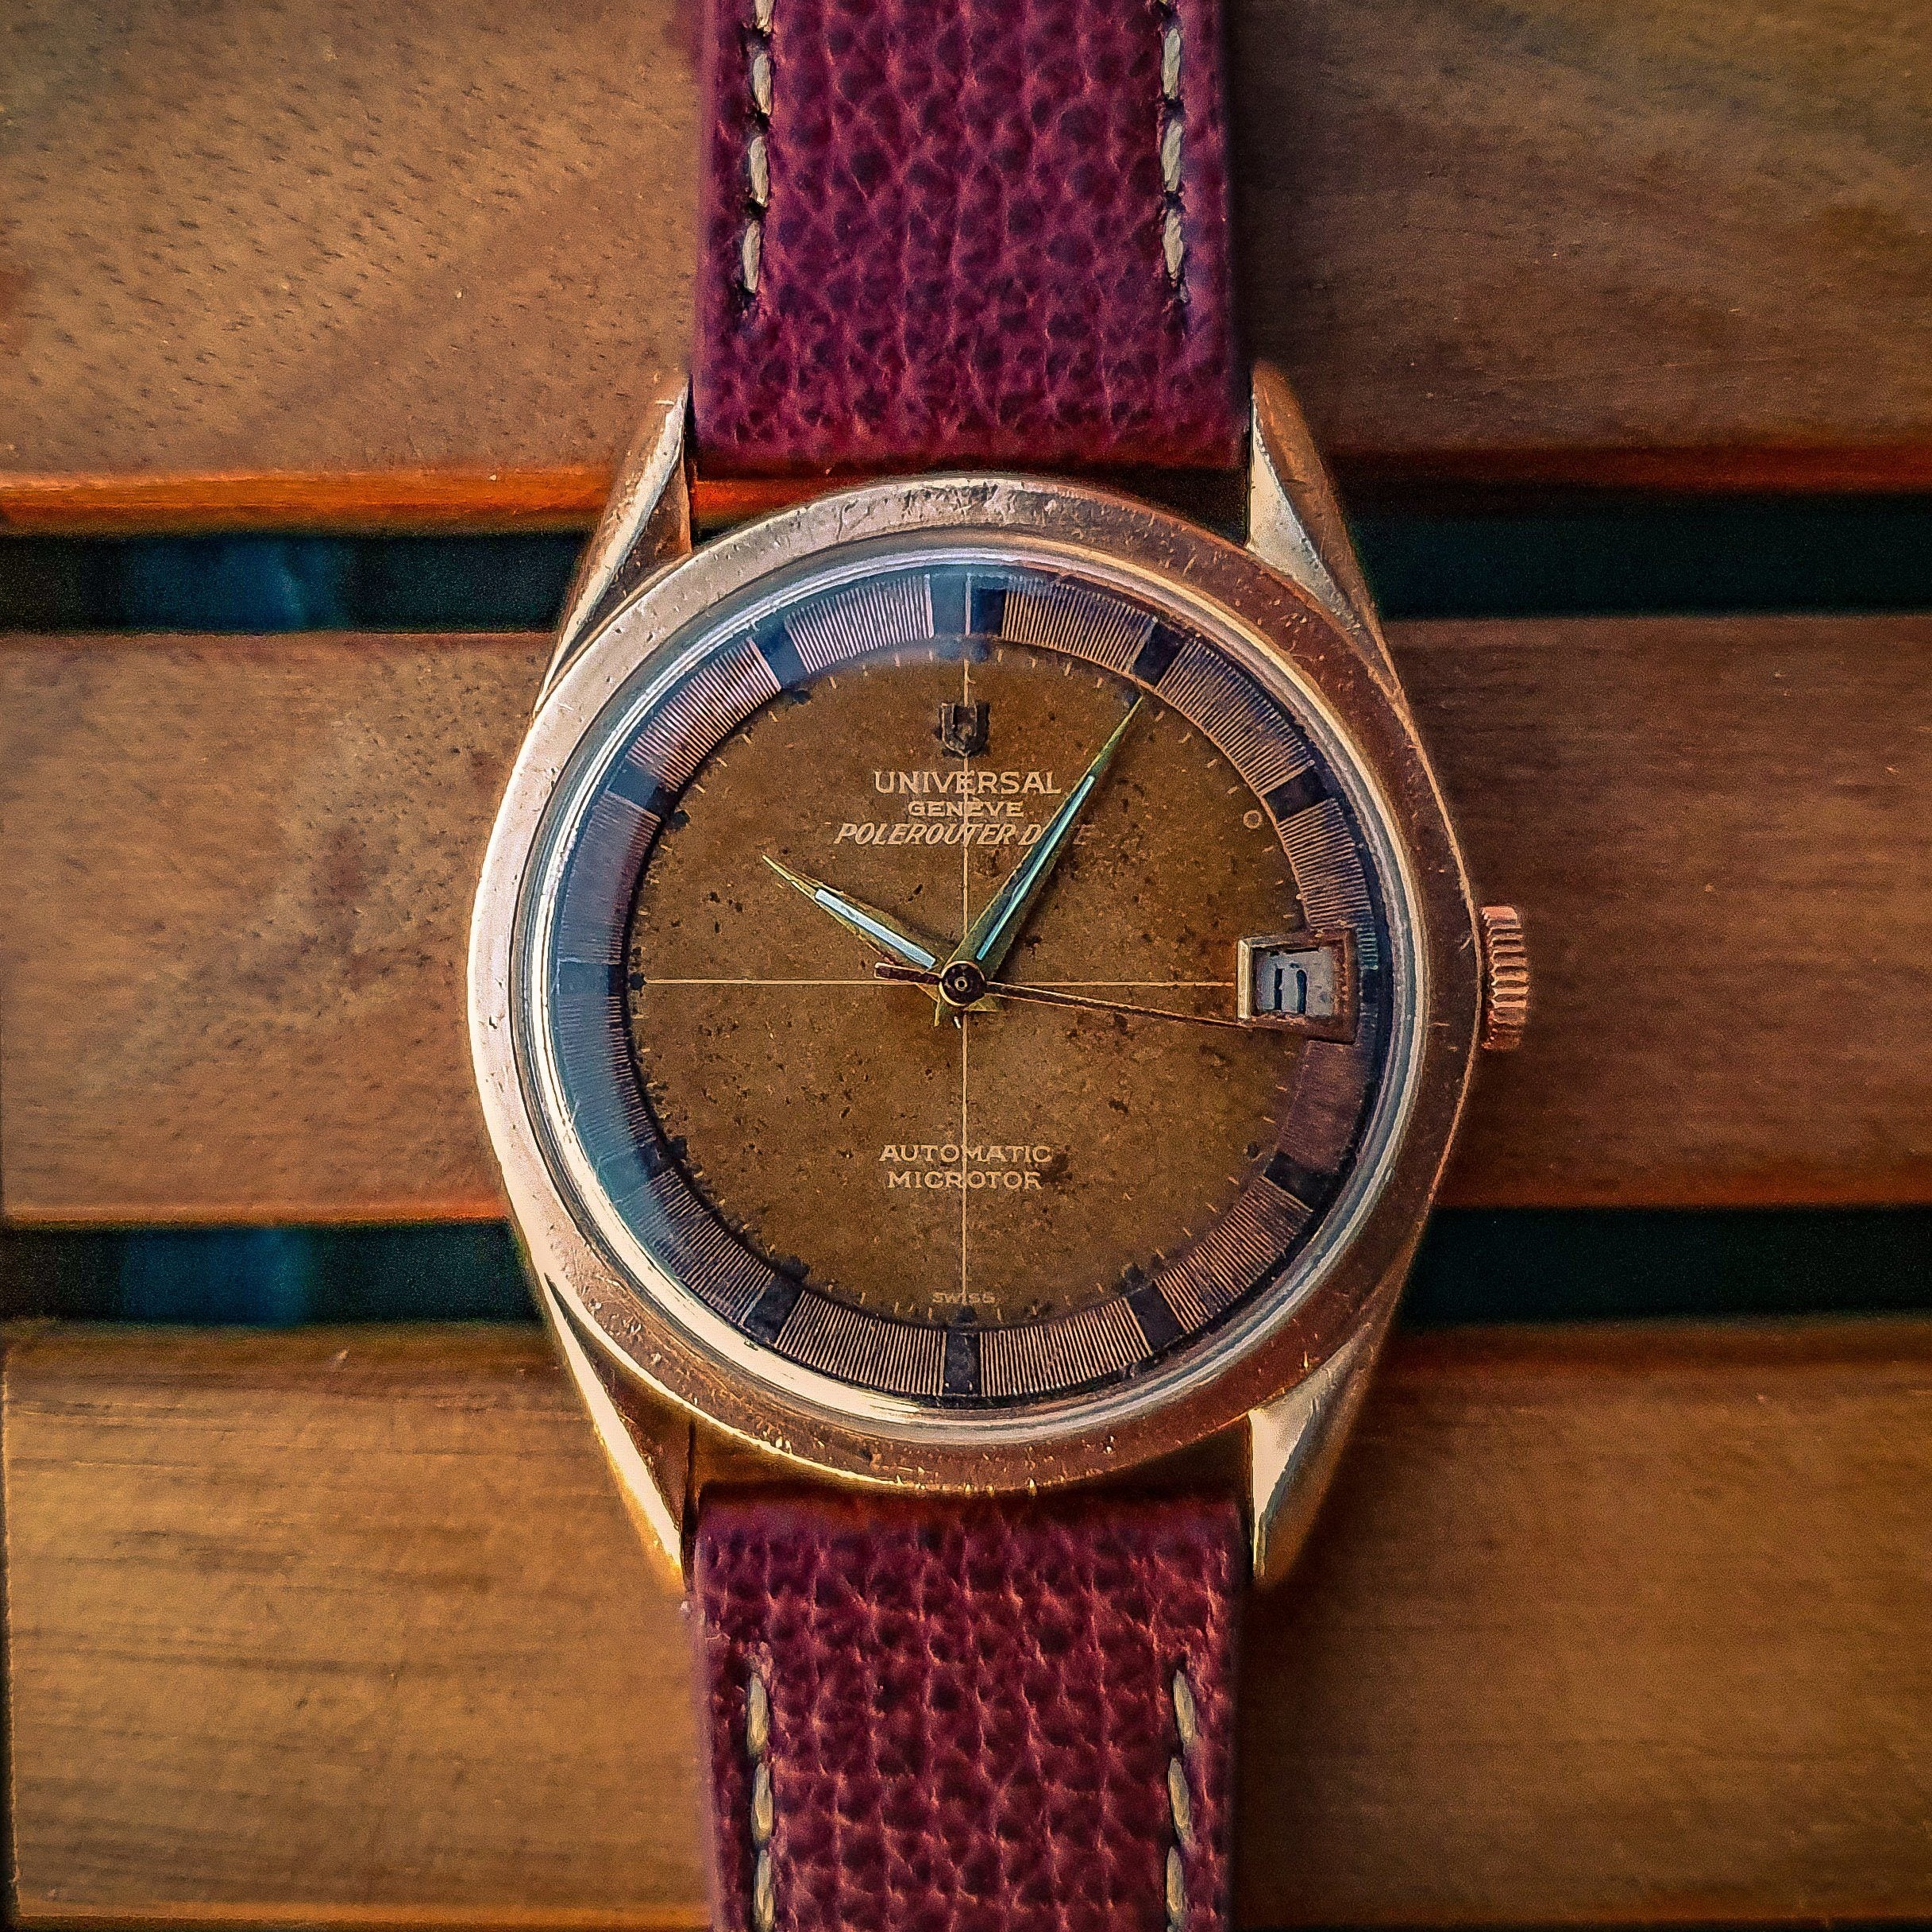 Check out our leather strap on this cool Universal Geneve.